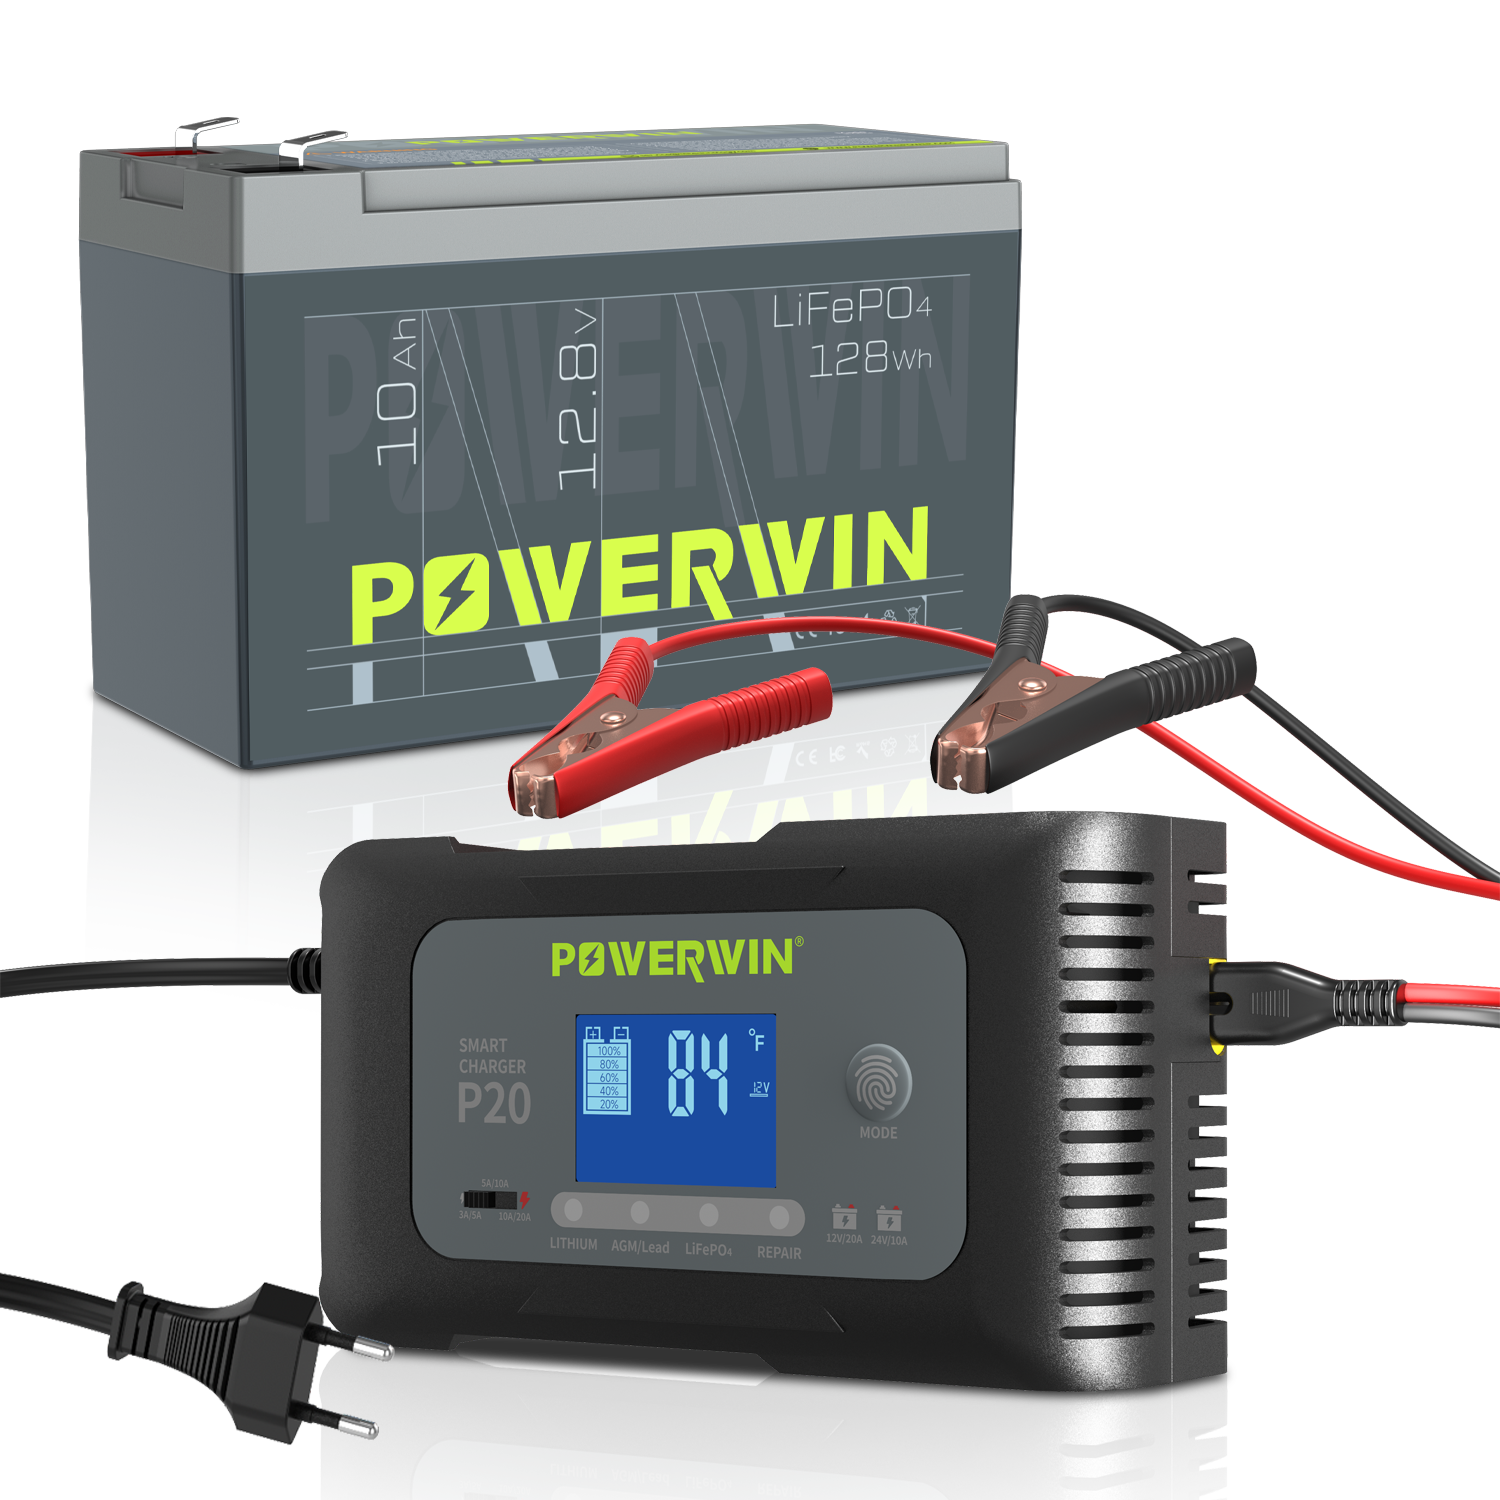 POWERWIN 12V 10Ah LiFePO4 Lithium Battery + Charger Set